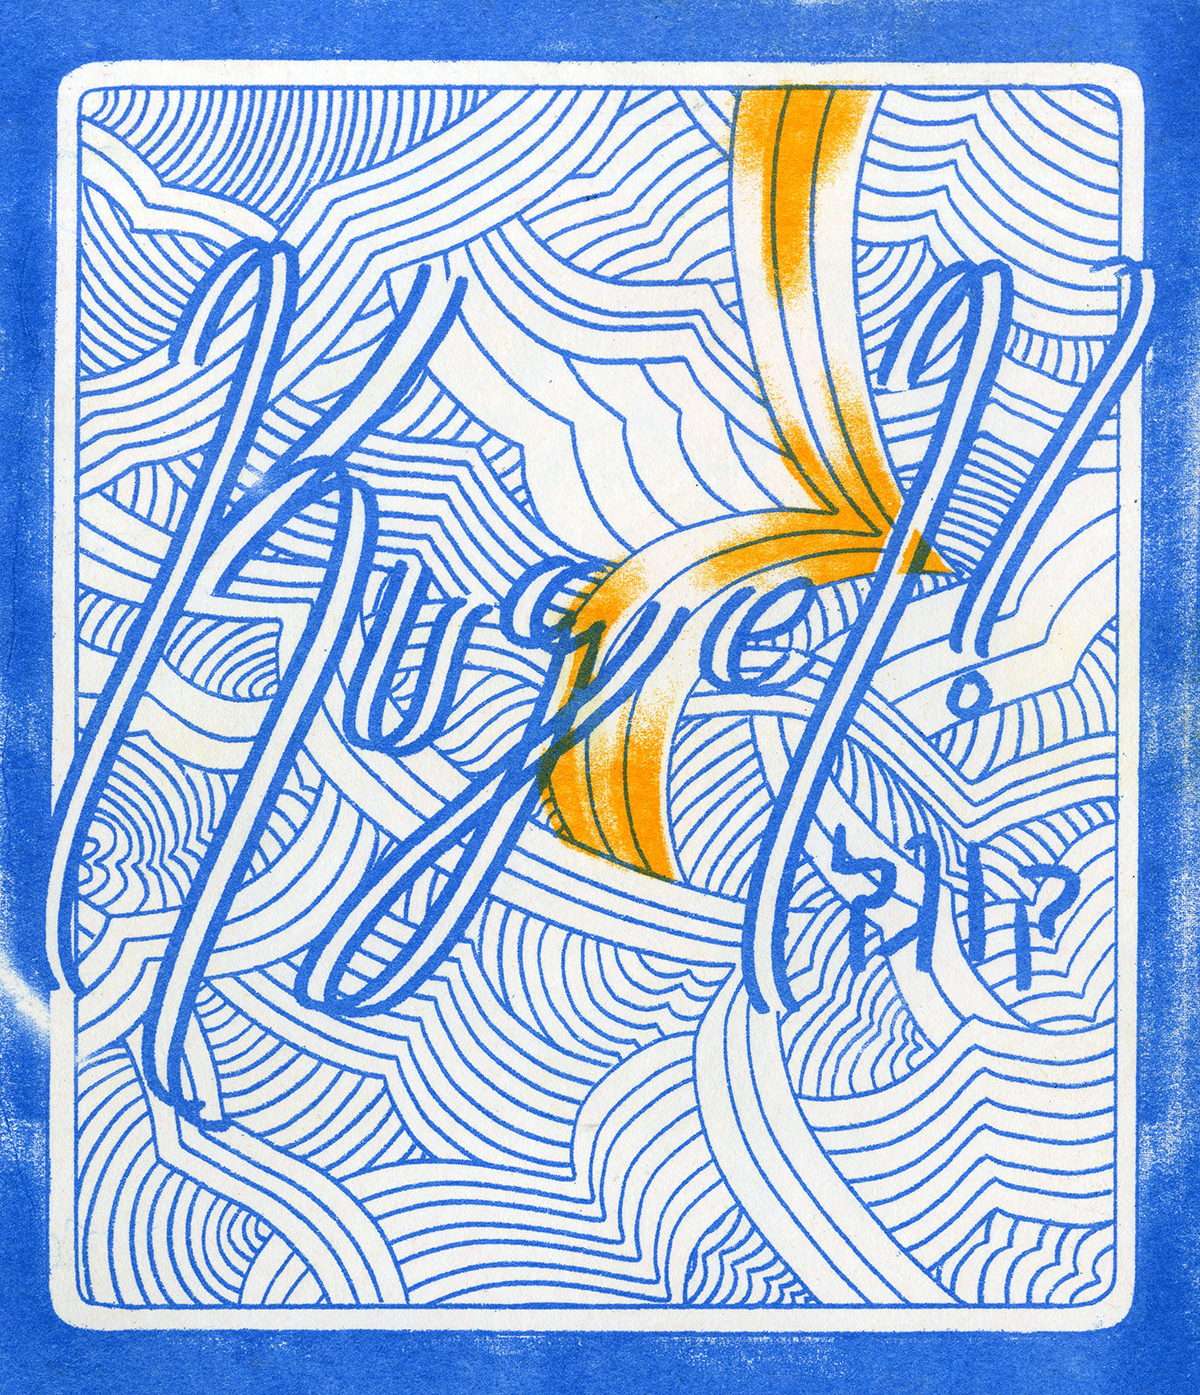 Poster design of blue wave link lined pattern with heavy blue outline, and golden fill in a small highlighted portion of the linework. Expressive hand drawn text reads 'Kugel?'